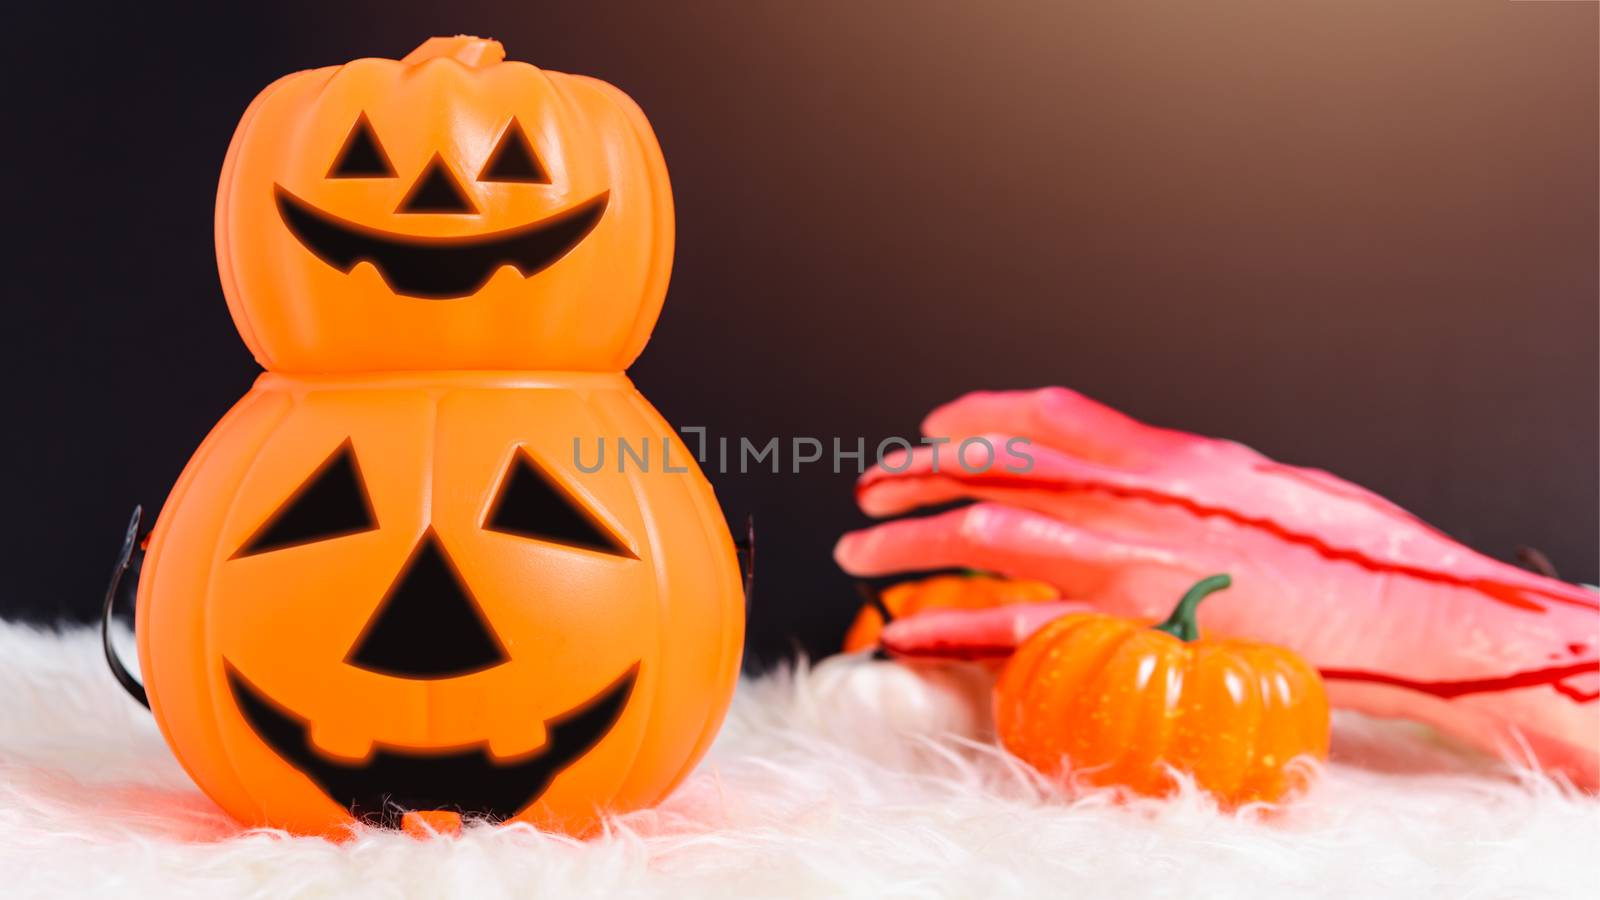 Stack Pumpkin Jack creepy and hand with blood in Halloween day concept on black background